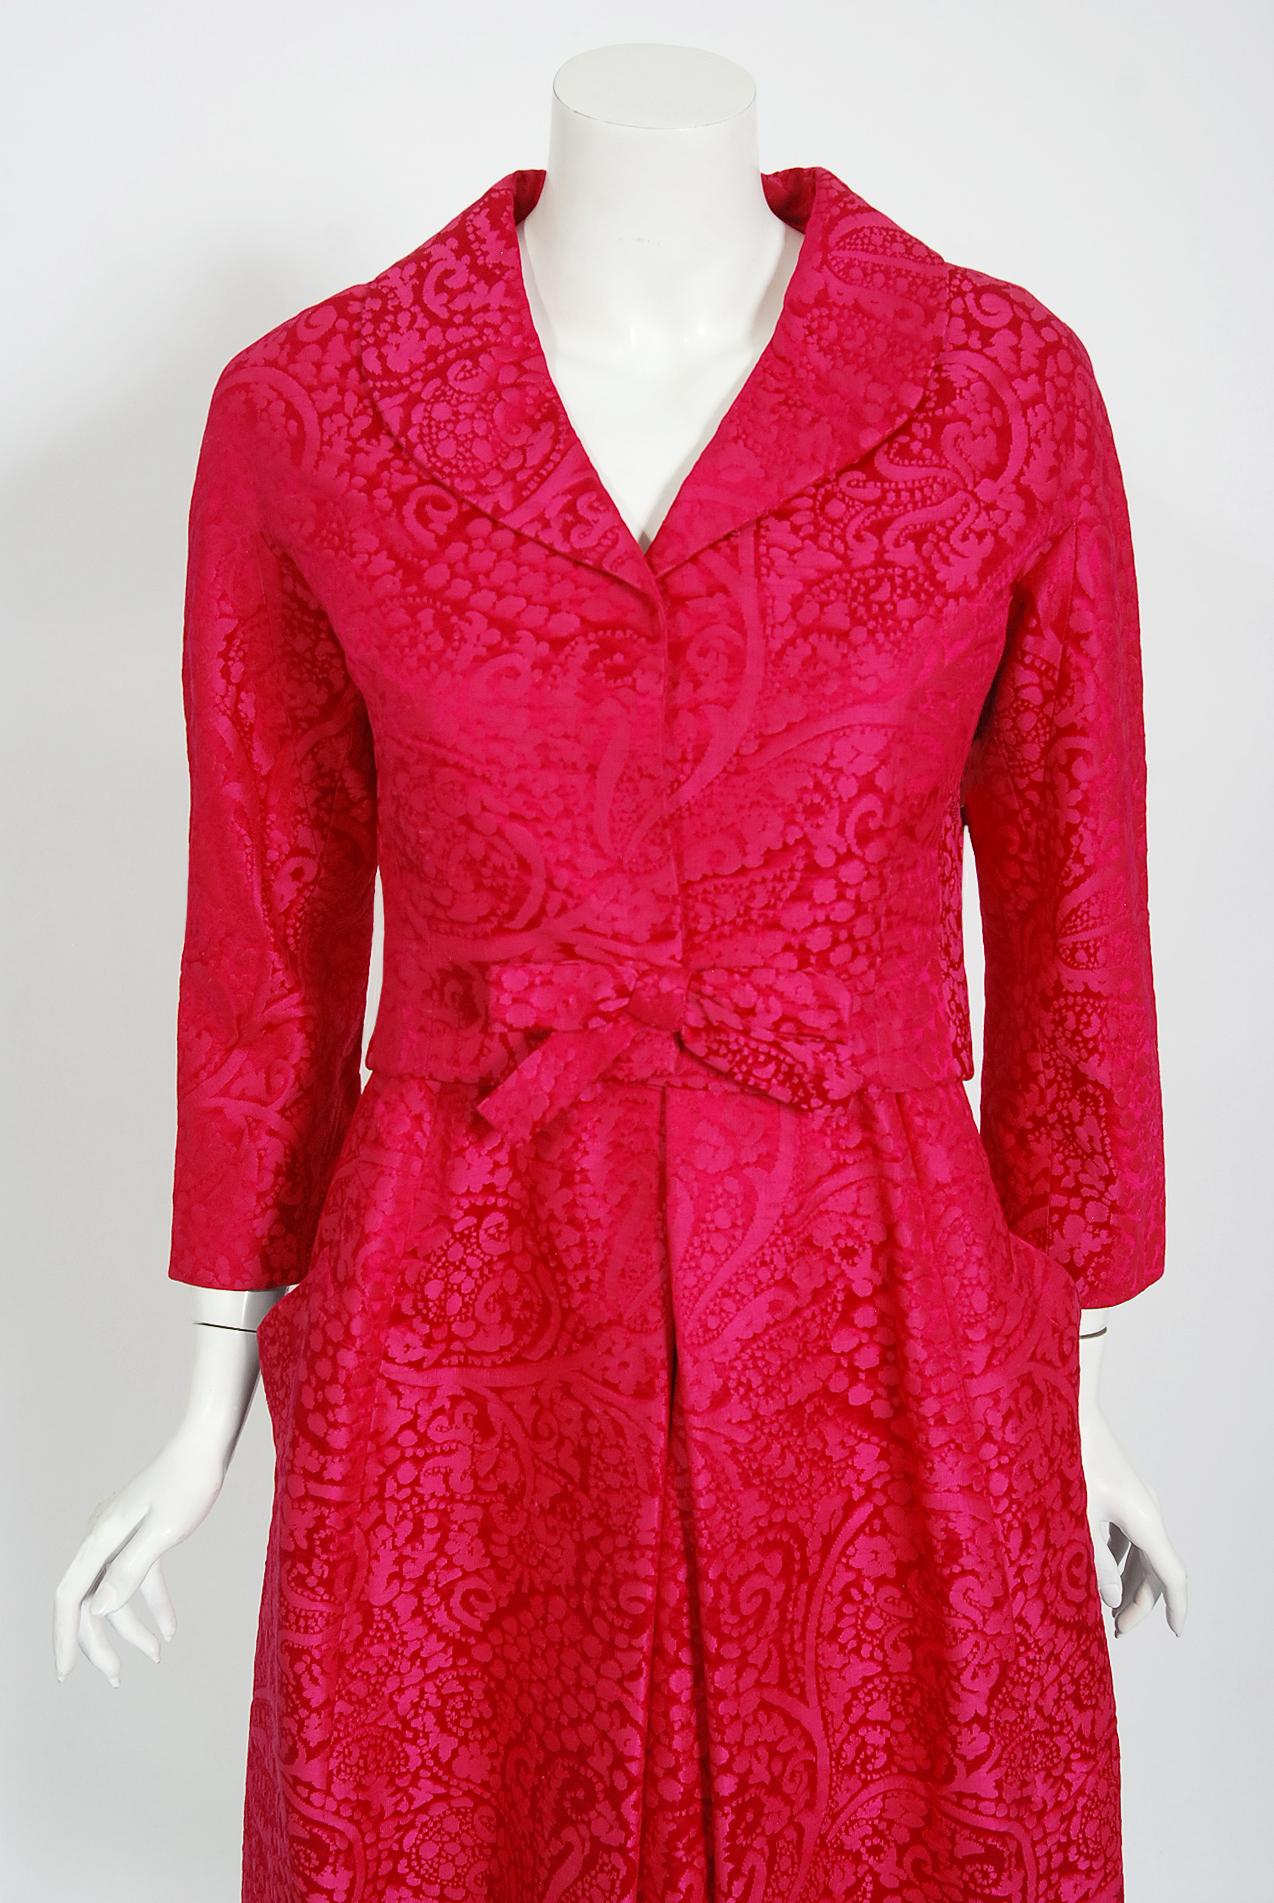 Vintage 1962 Christian Dior Haute Couture Pink Textured Silk Dress and ...